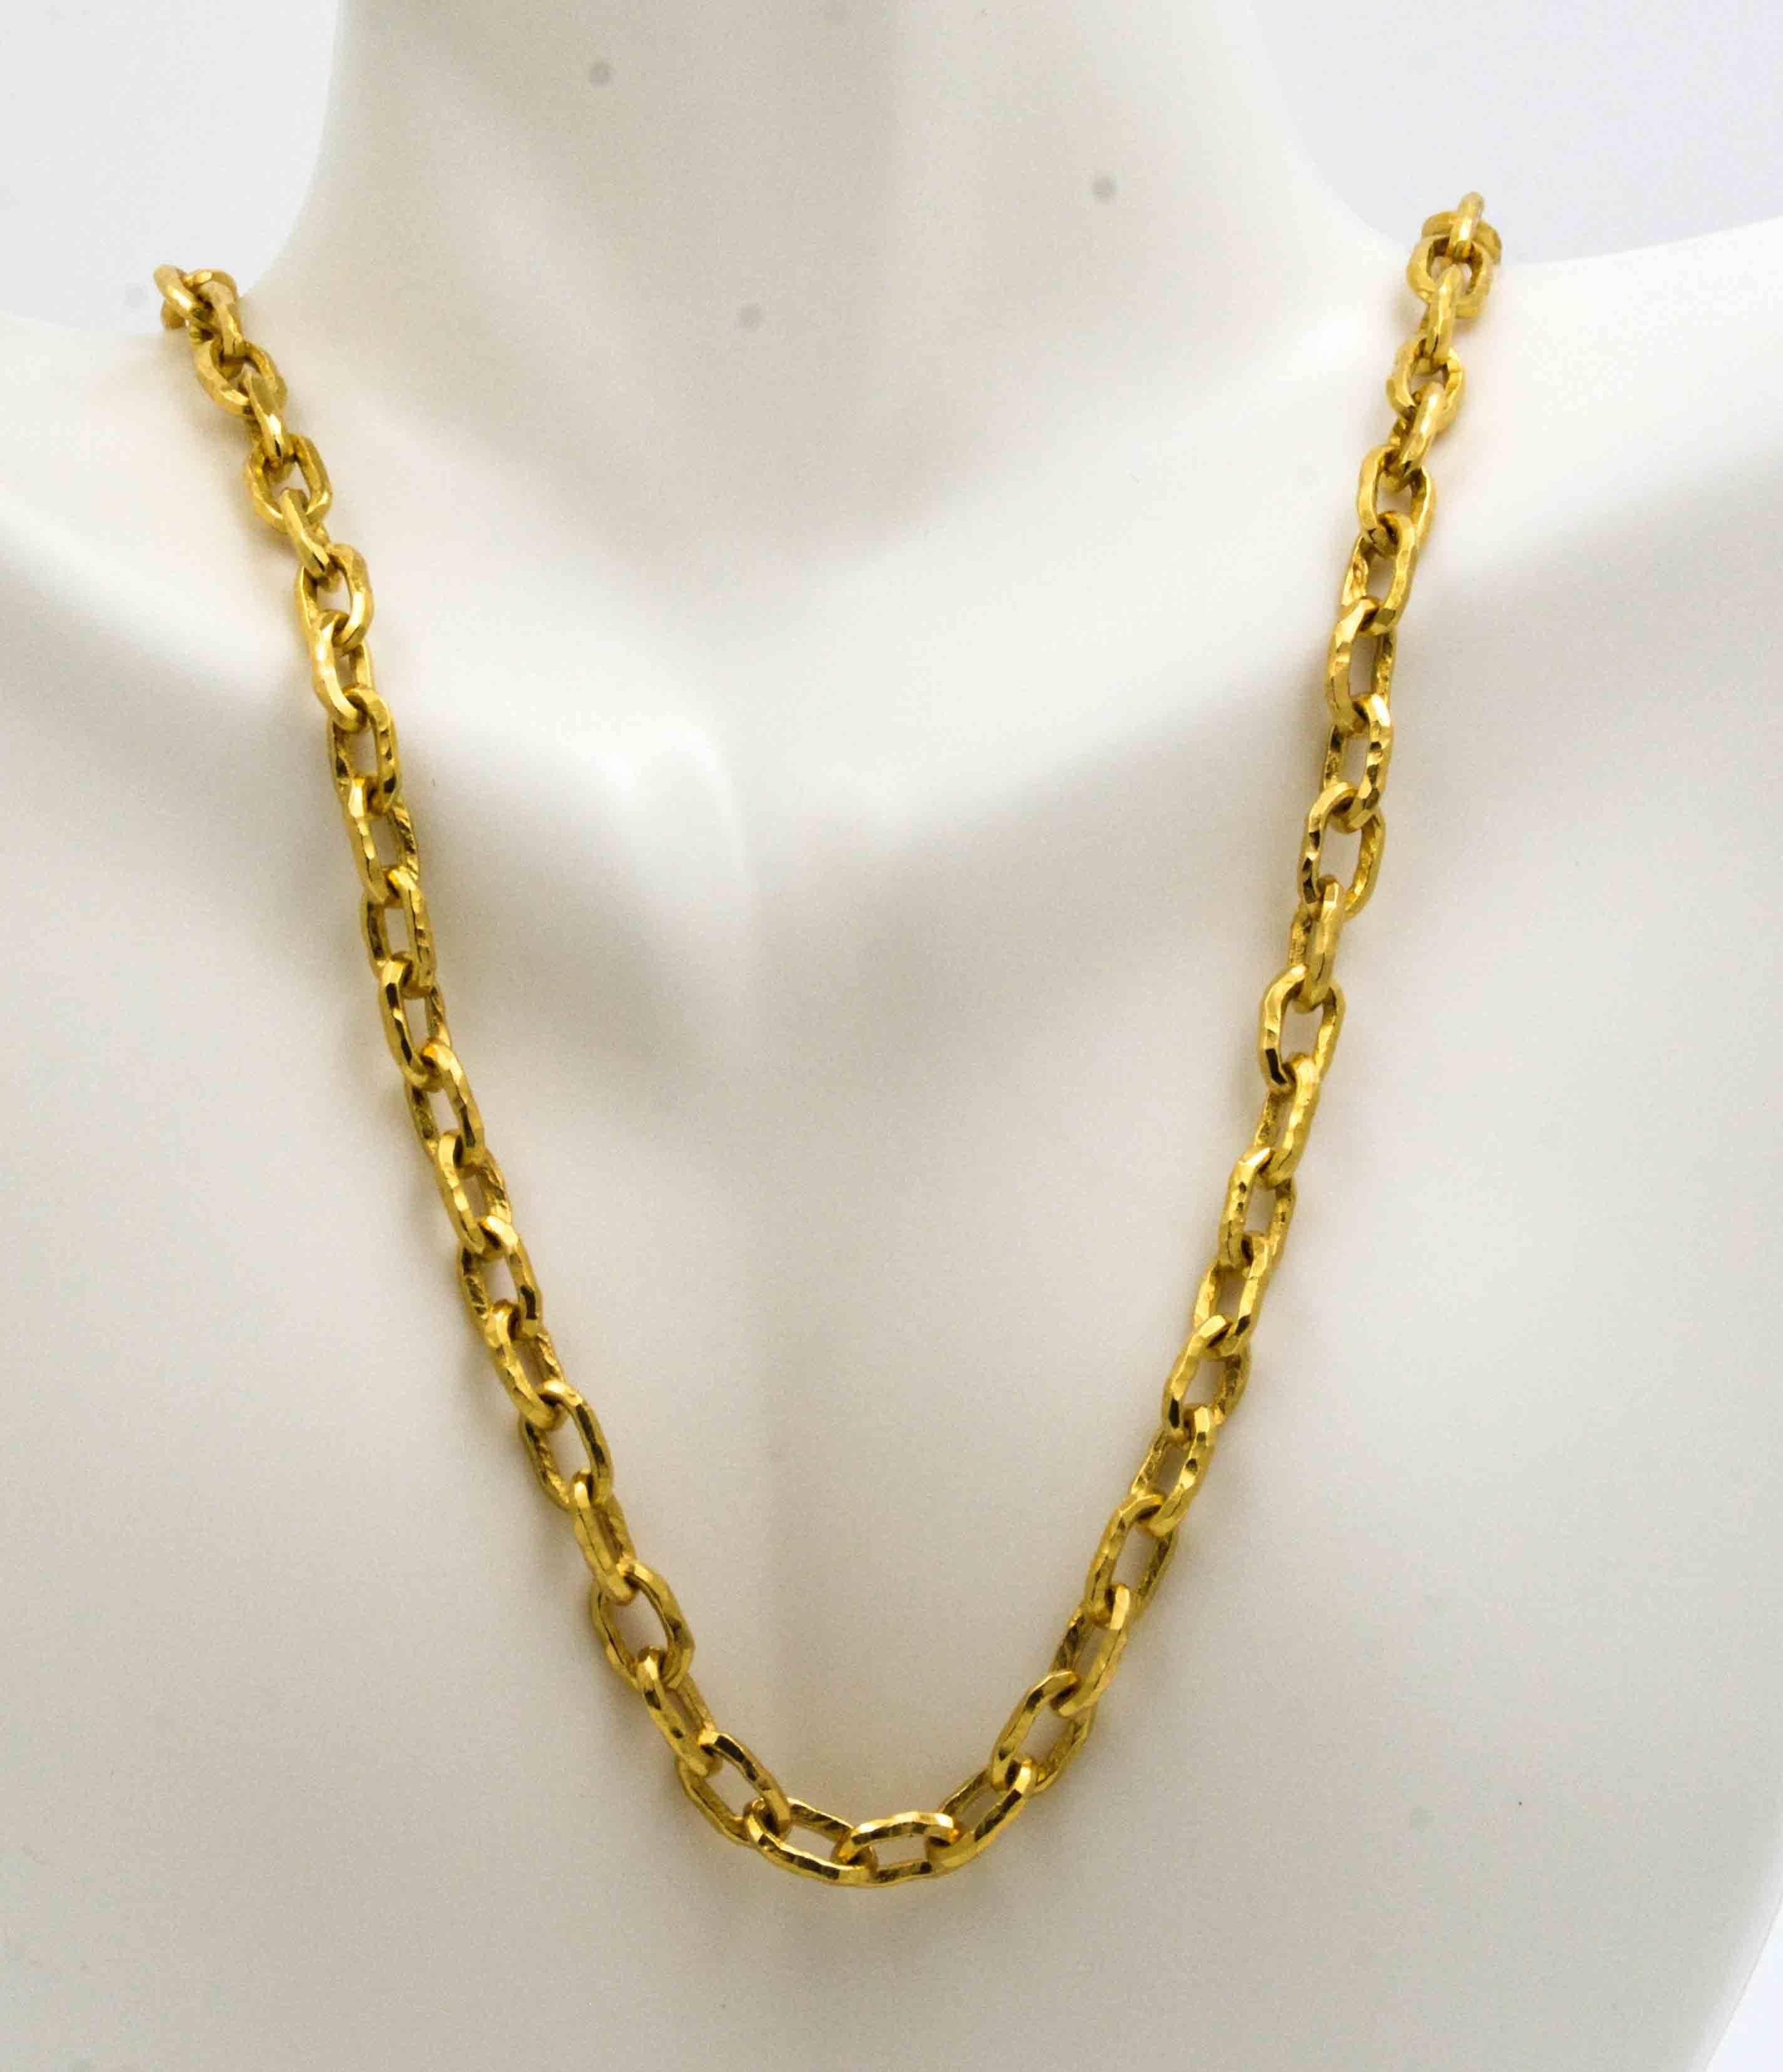 This classic Jean Mahie small cadene chain is 16 inches long and is finished in the classic Jean Mahie hammered texture. The links measure 9.15X5.15X1.62 mm. The chain features an attractive hook and eye clasp with a very functional figure 8 safety